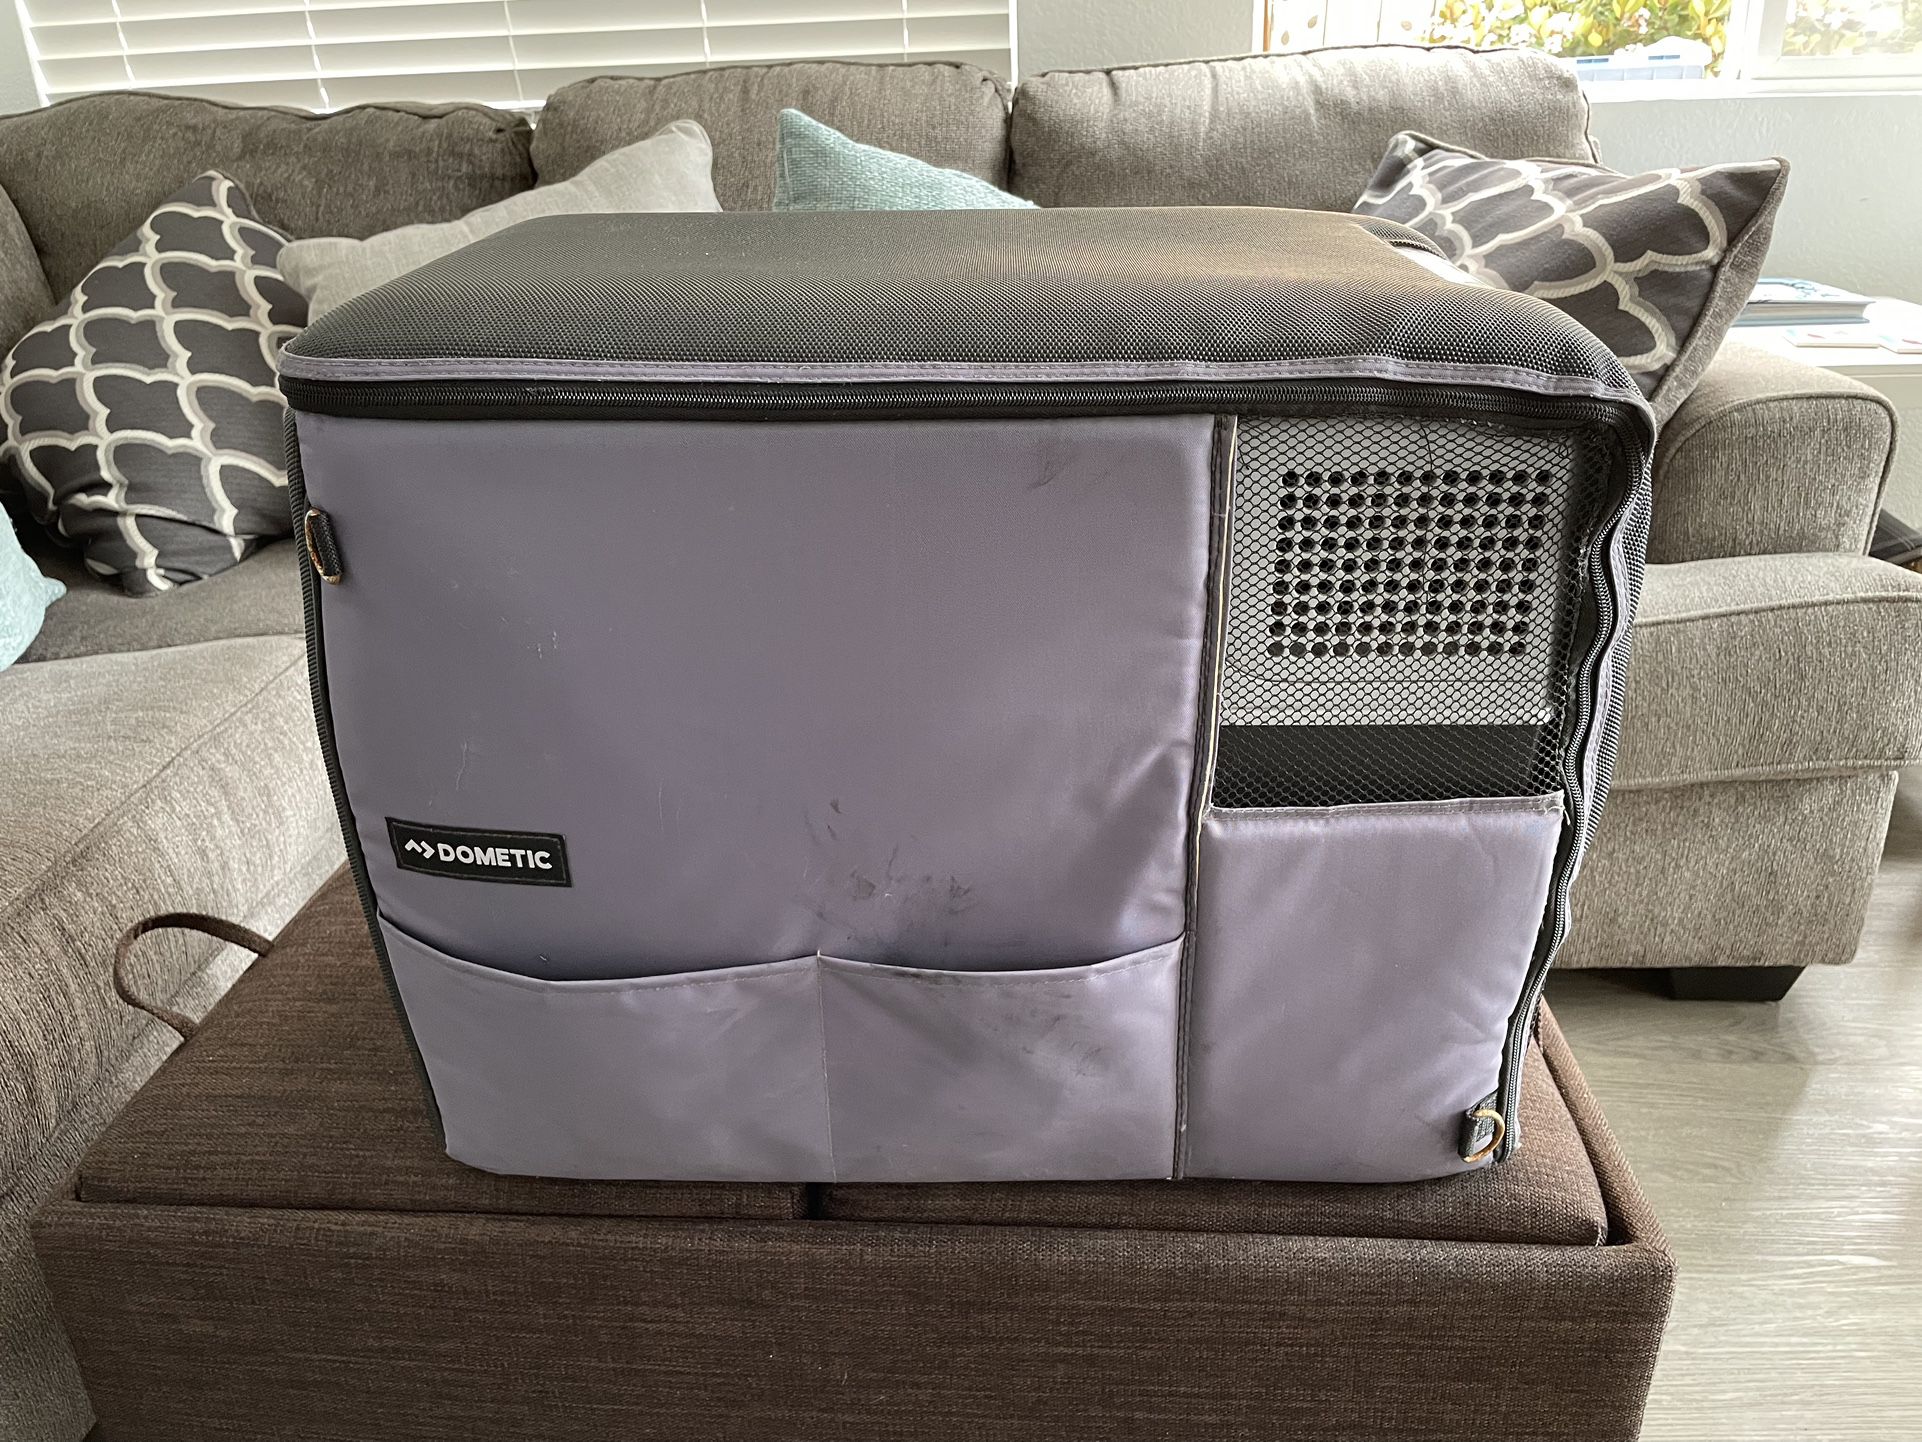 Domestic AC & DC Powered Portable Cooler